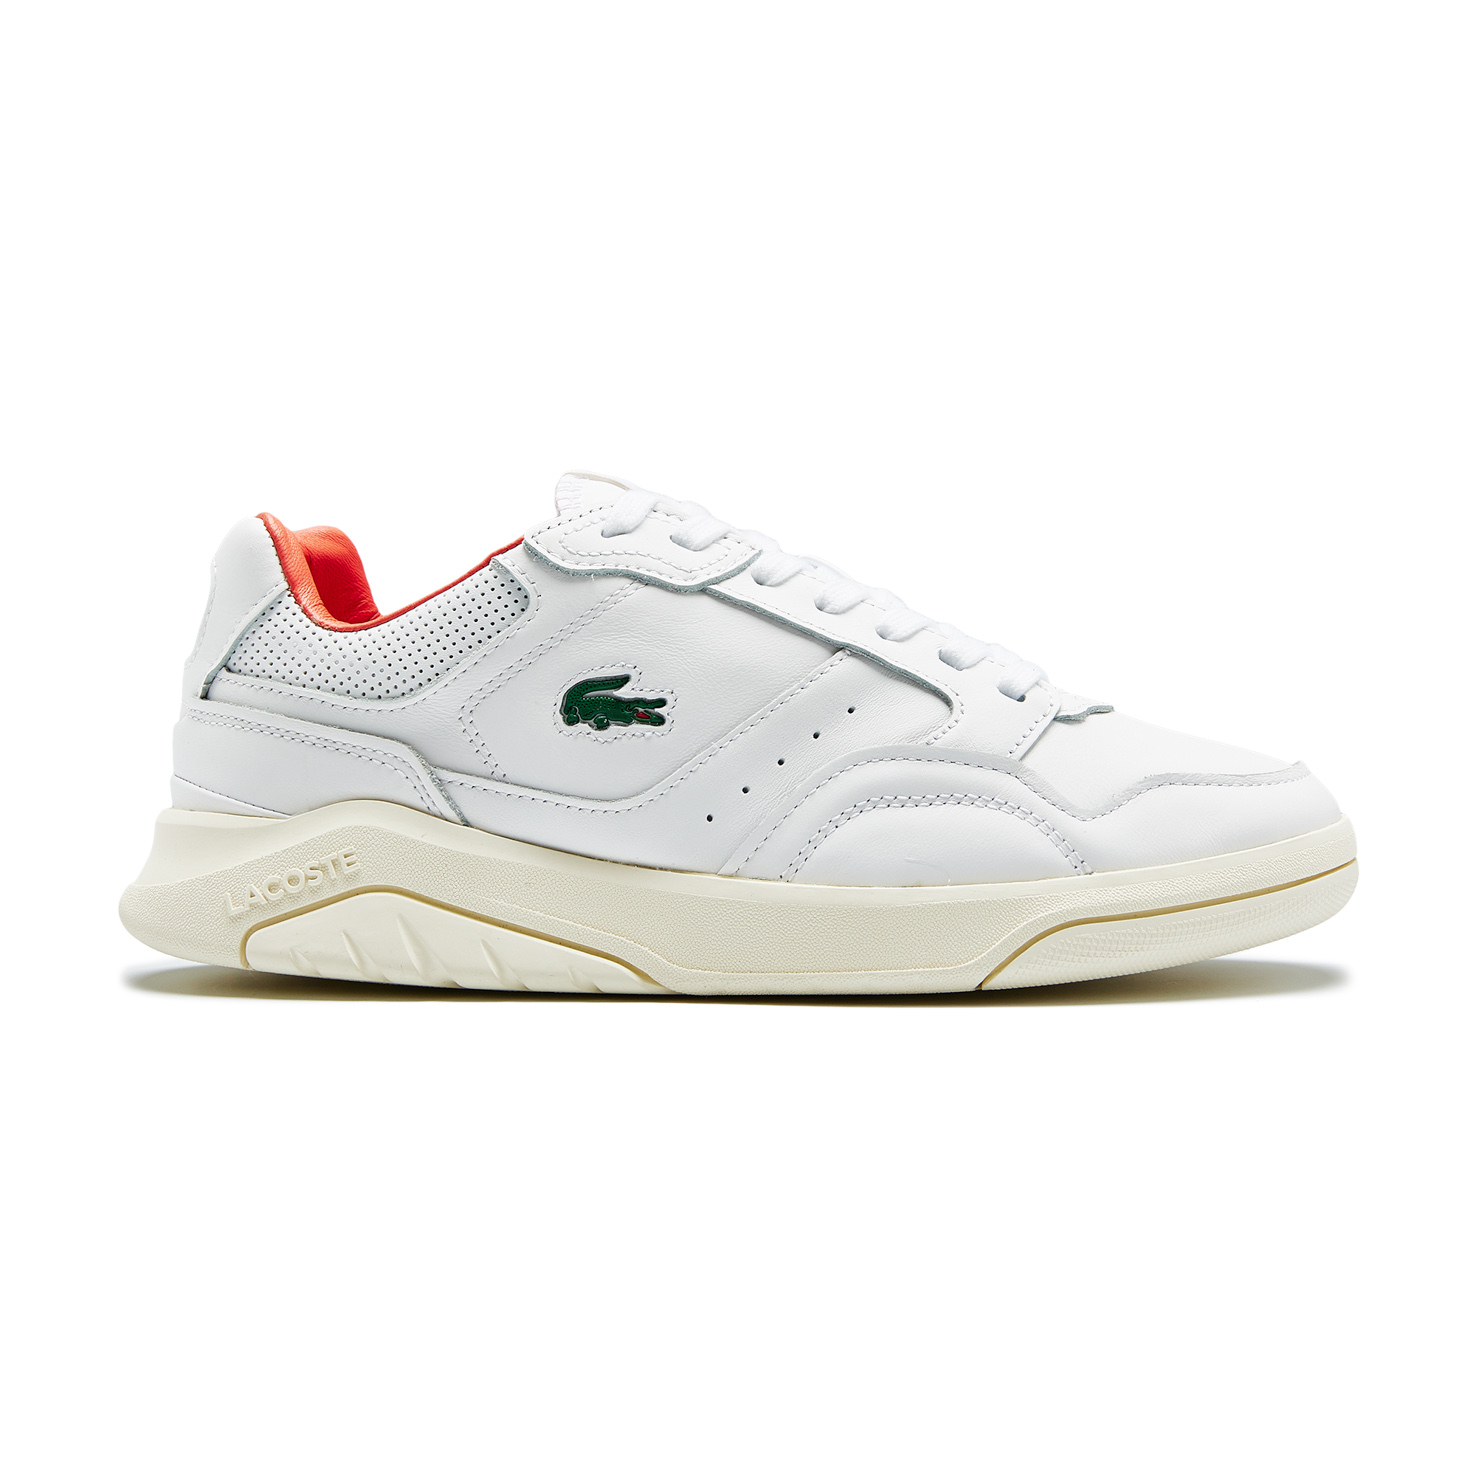 GAME ADVANCE LUXE LACOSTE, размер 36, цвет белый 741SFA0066 - фото 1